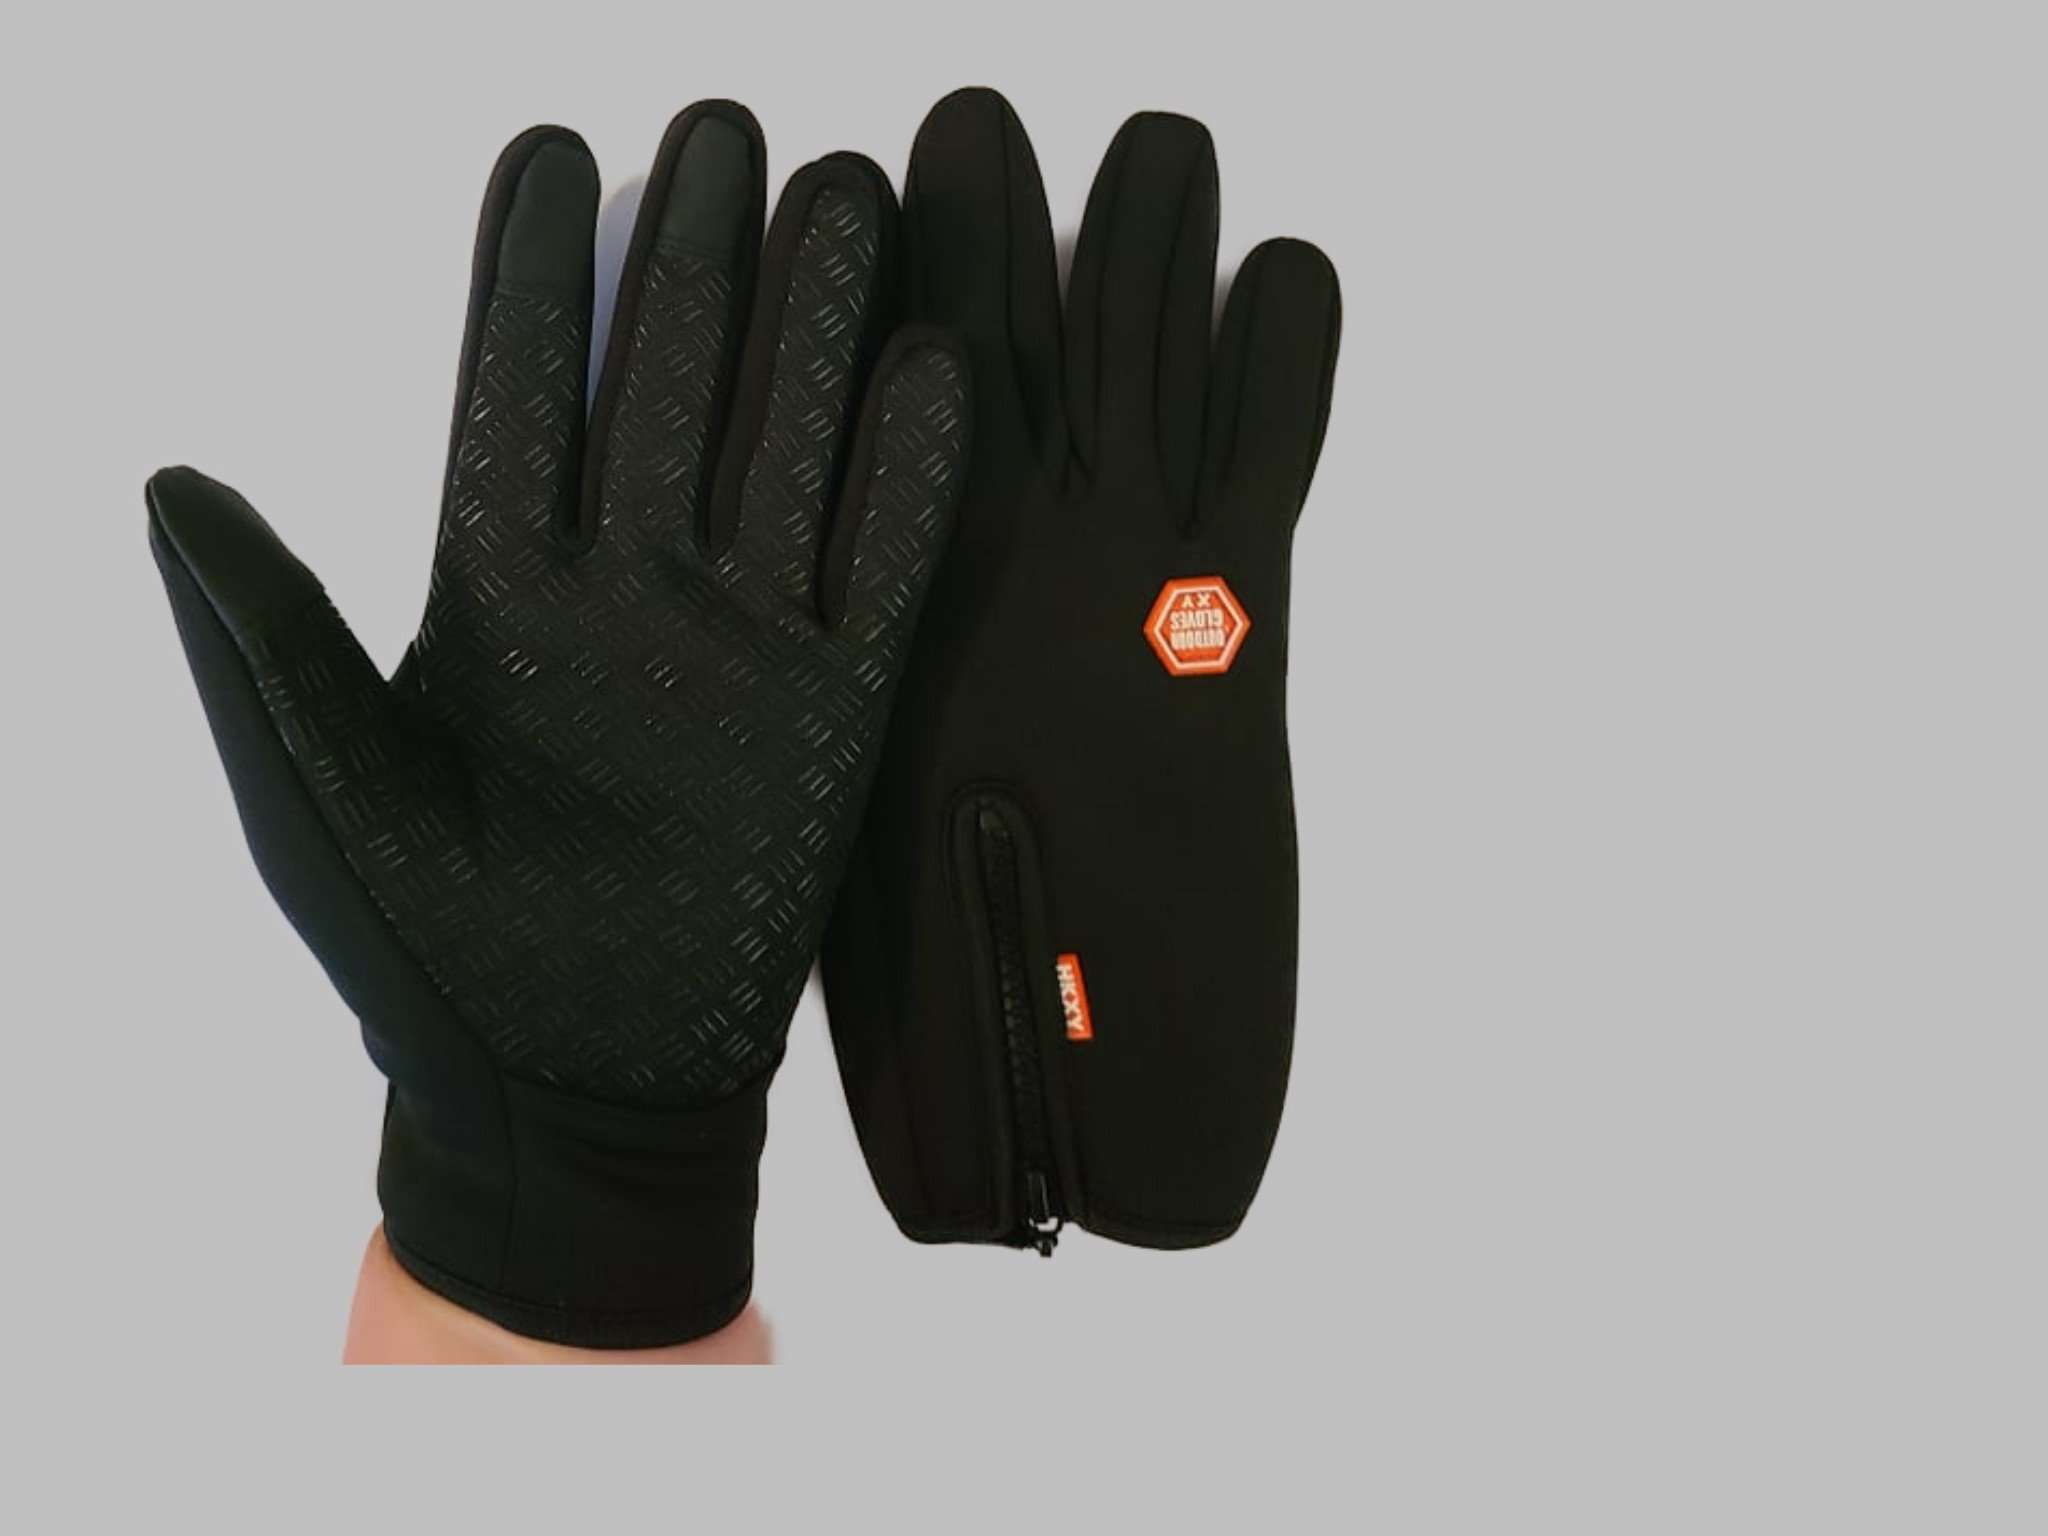 Winter Thermal Warm Outdoor Sports Riding Gloves -Touchscreen **RED TAG